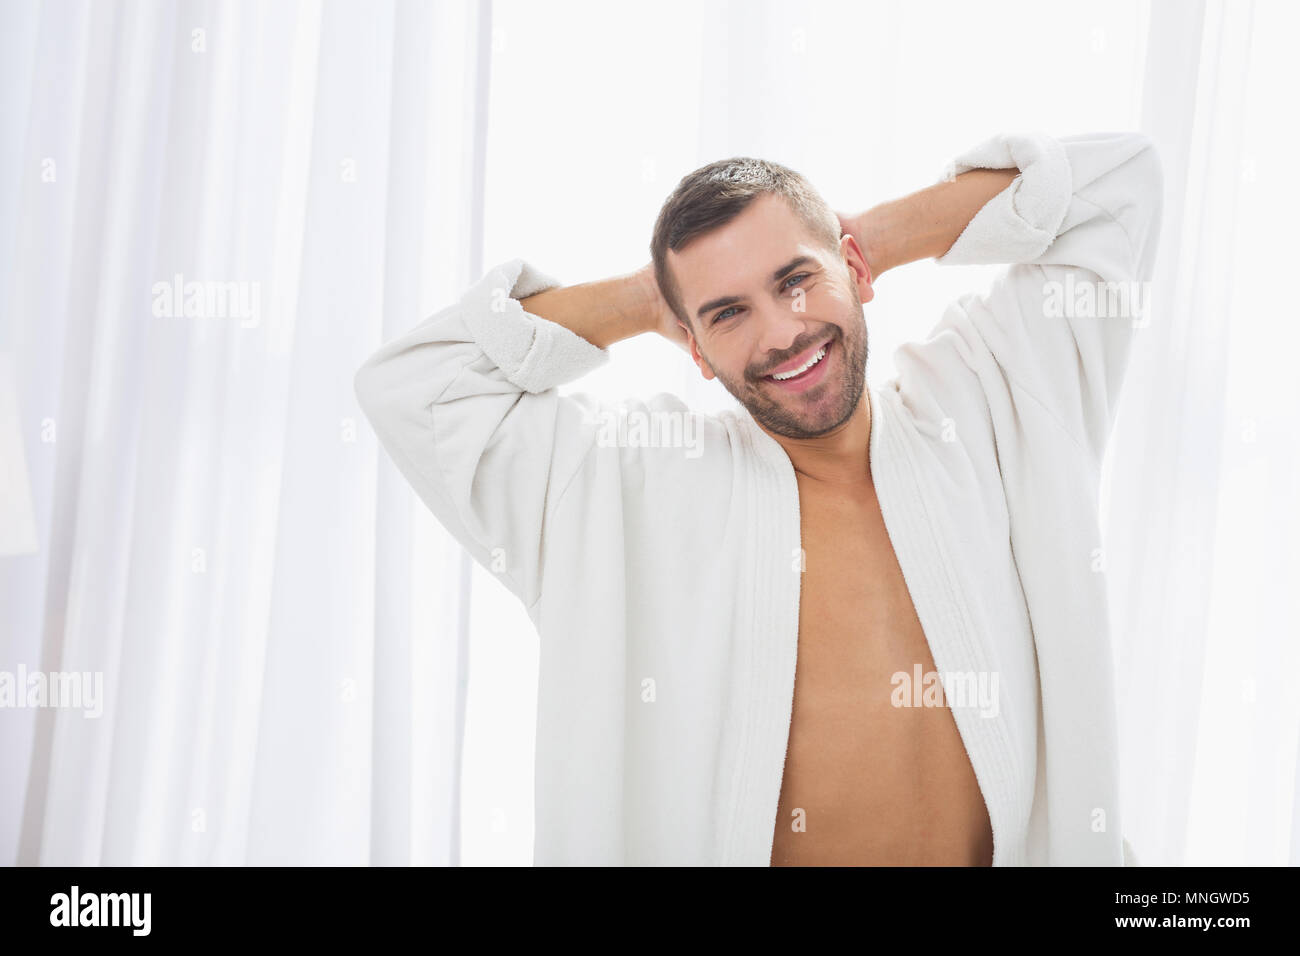 Delighted positive man being in a great mood Stock Photo